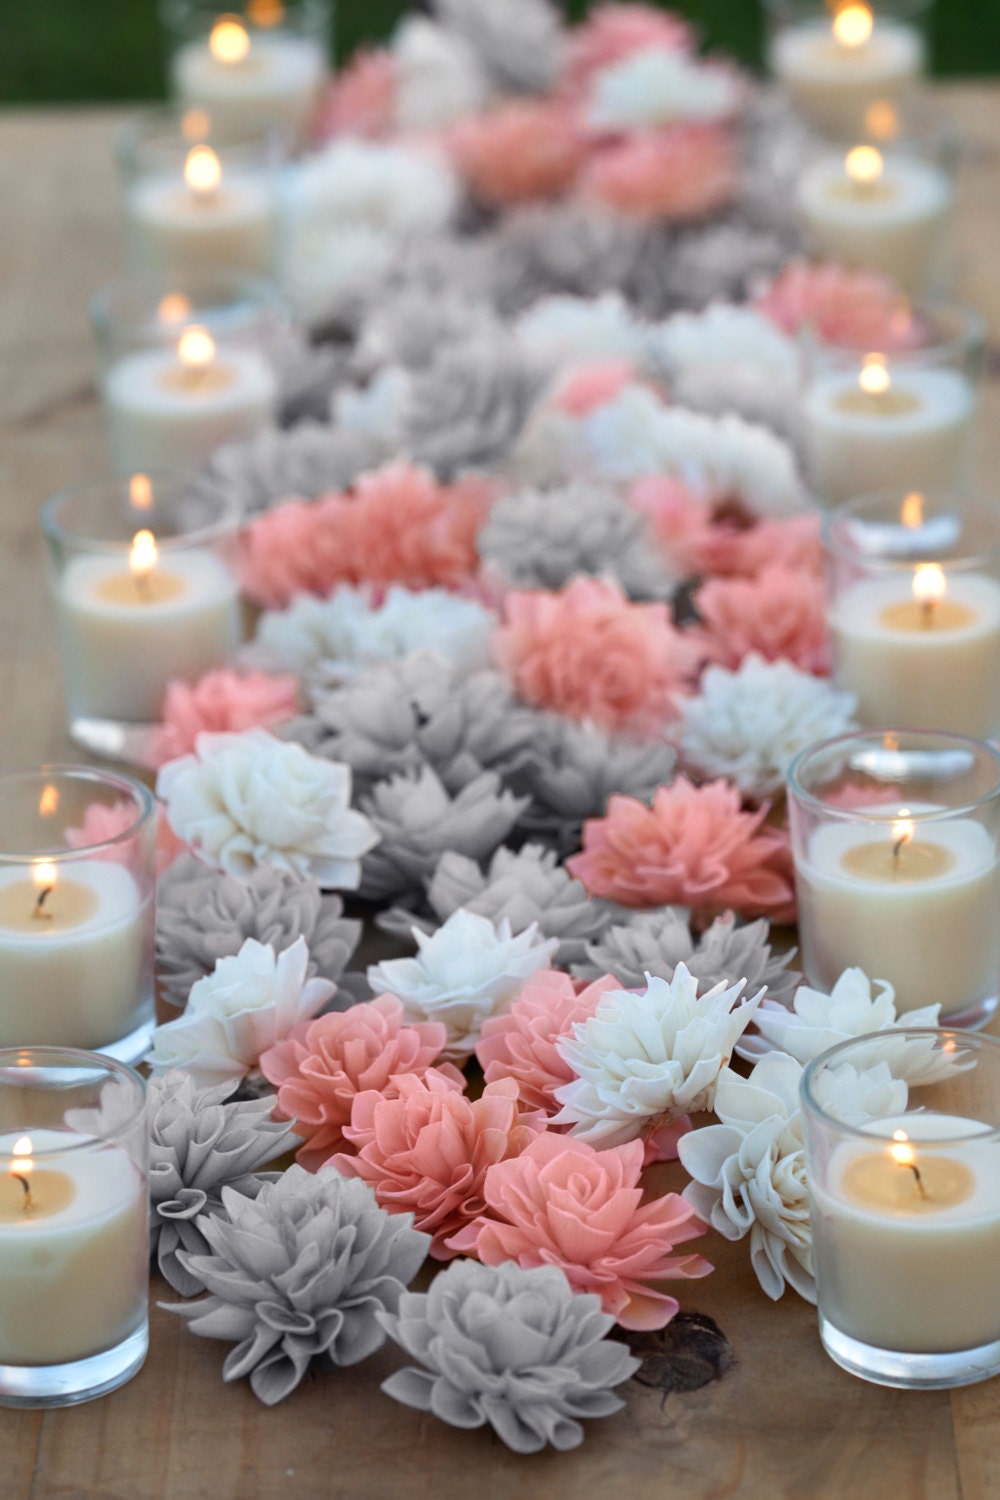 20 HQ Images Cheap Flowers For Table Decorations - Stunning Handmade Wedding Table Decorations | CHWV